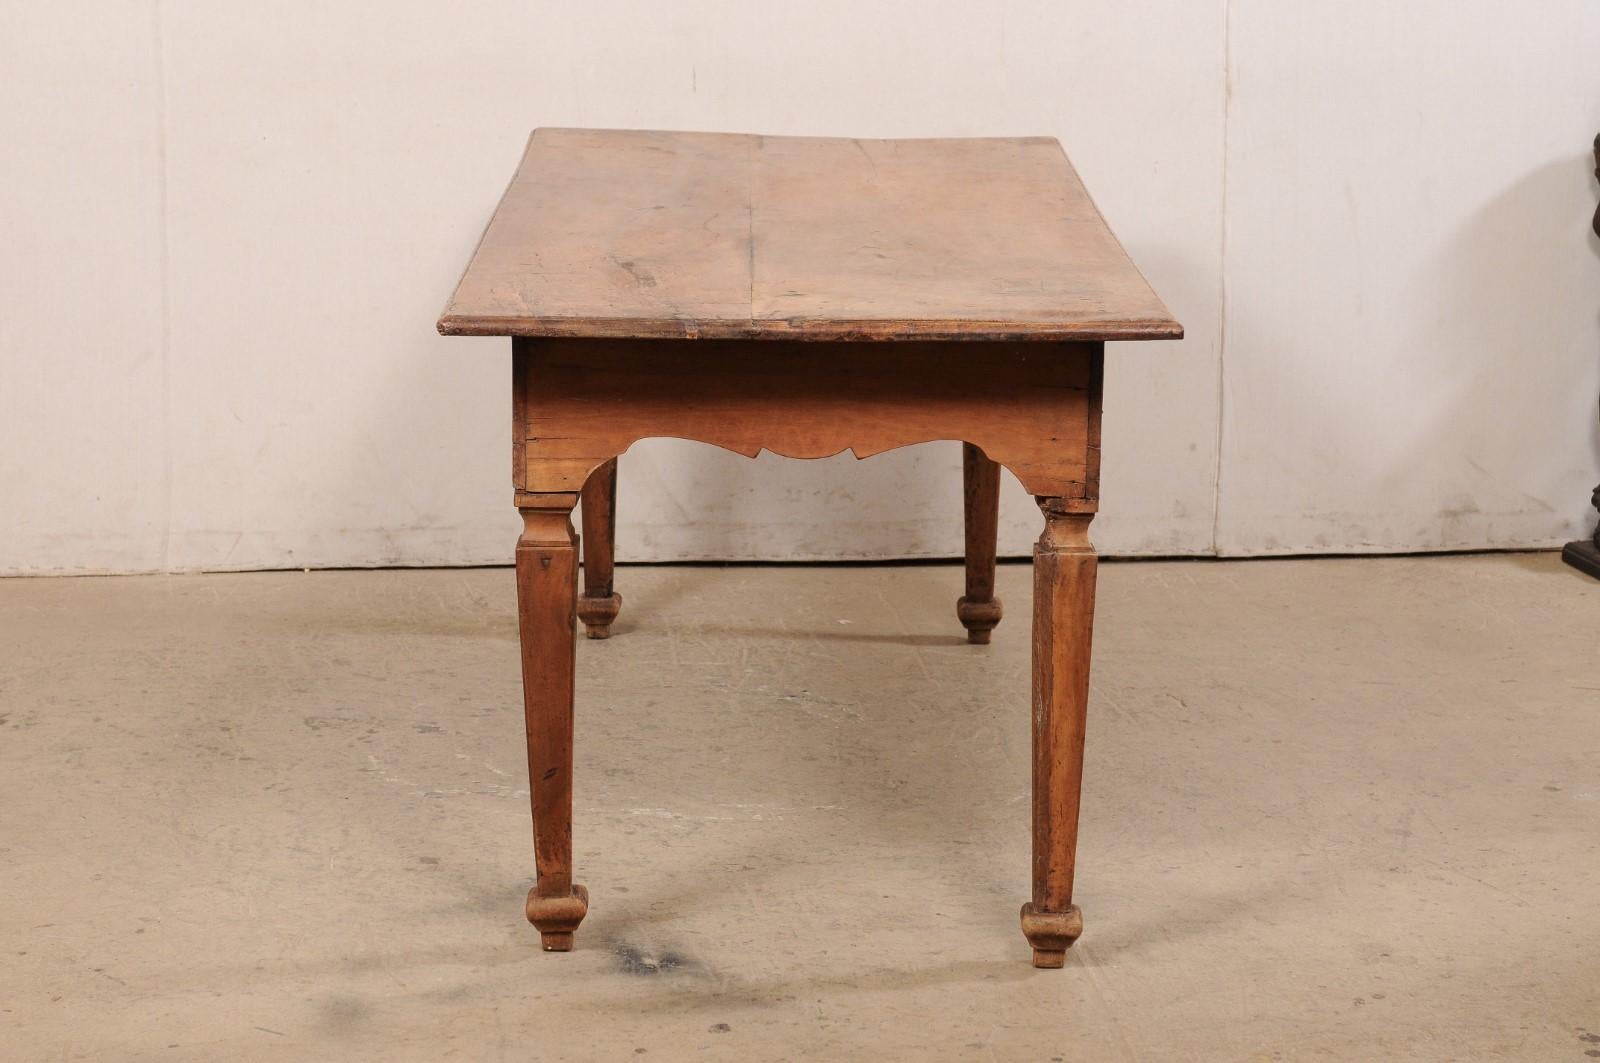 A Late 18th C. Italian Walnut Farm Table with Carved Skirt, 6 Ft Long For Sale 5